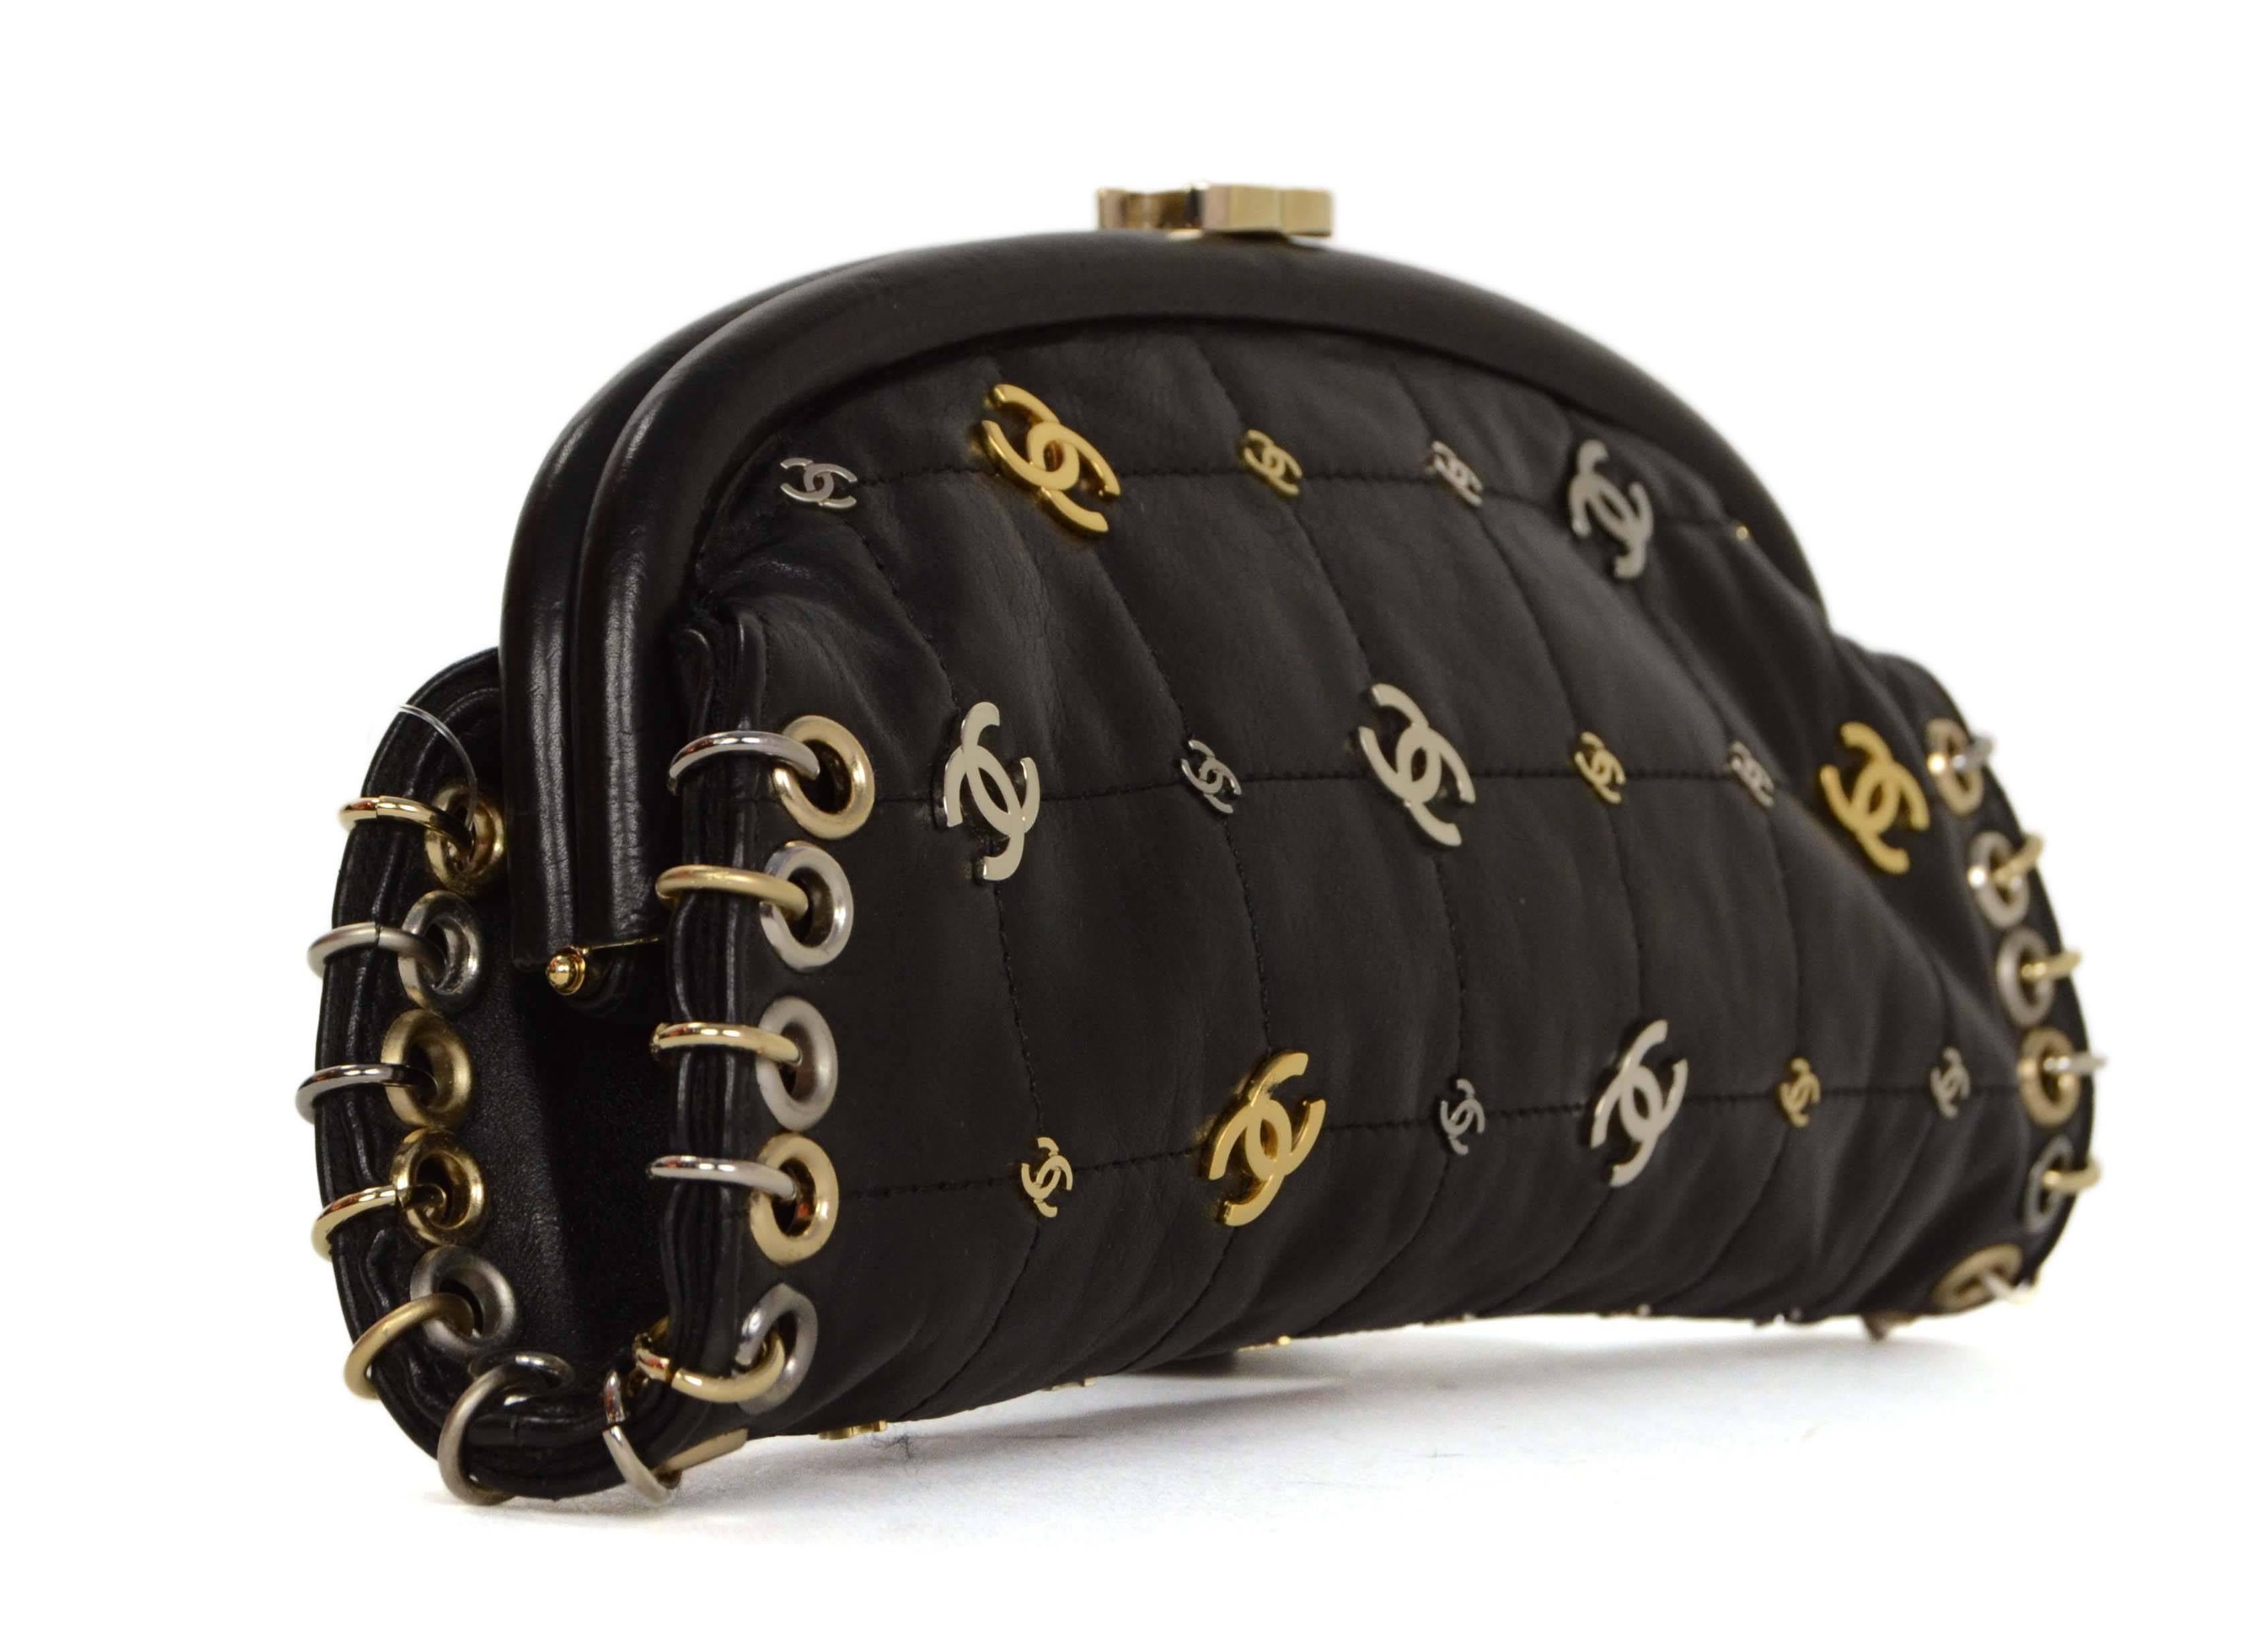 Chanel Black Lambskin CC Punk Timeless Clutch Bag
Features gold, silver, and ruthenium cc's all over the bag

    Made In: France

    Year of Production: 2007

    Color: Black

    Hardware: Gold, silver, ruthenium

    Materials: